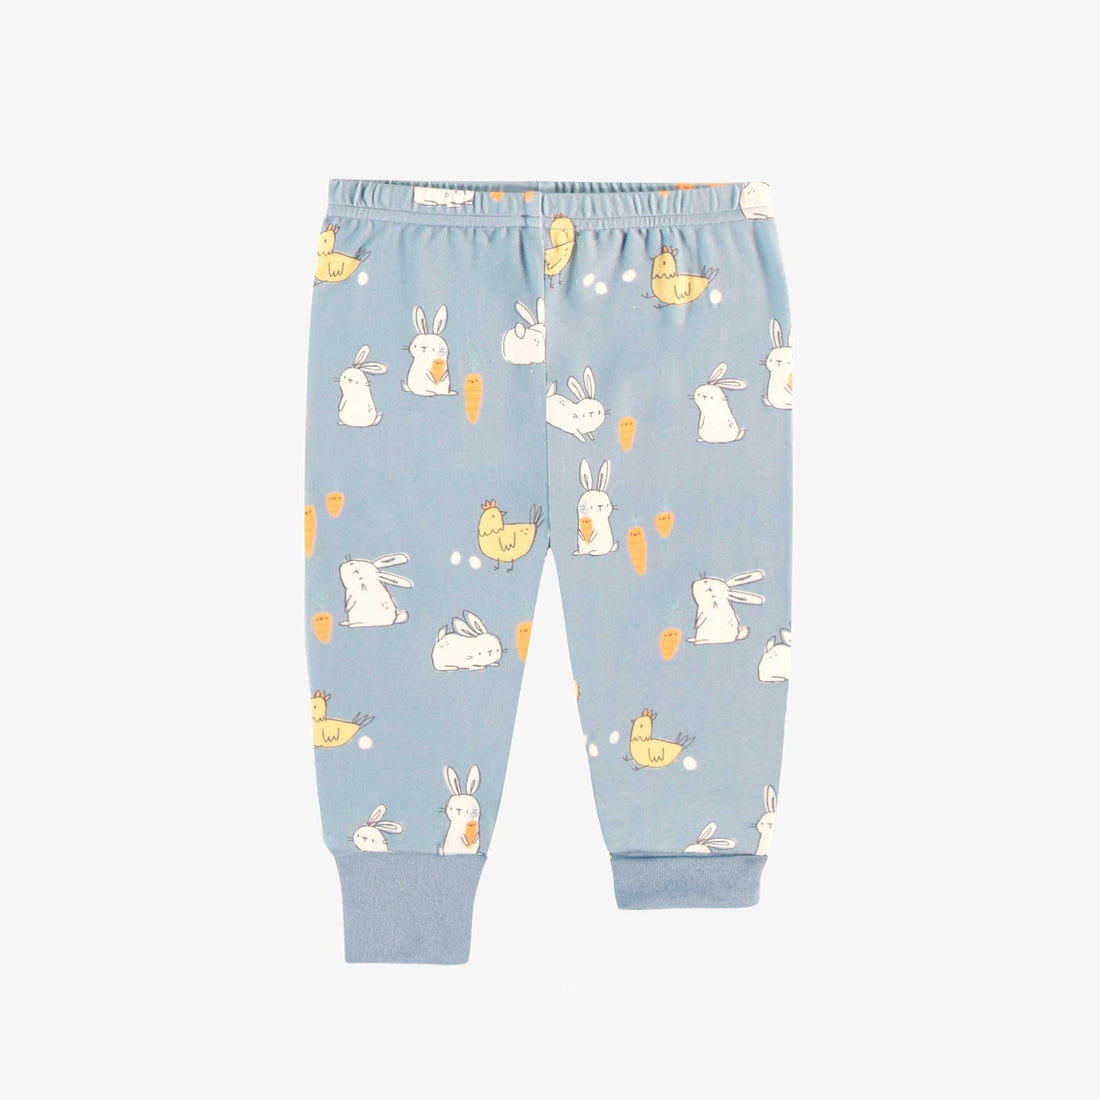 CREAM AND BLUE TWO-PIECES PAJAMA WITH BUNNIES AND CHICKENS PRINT, BABY